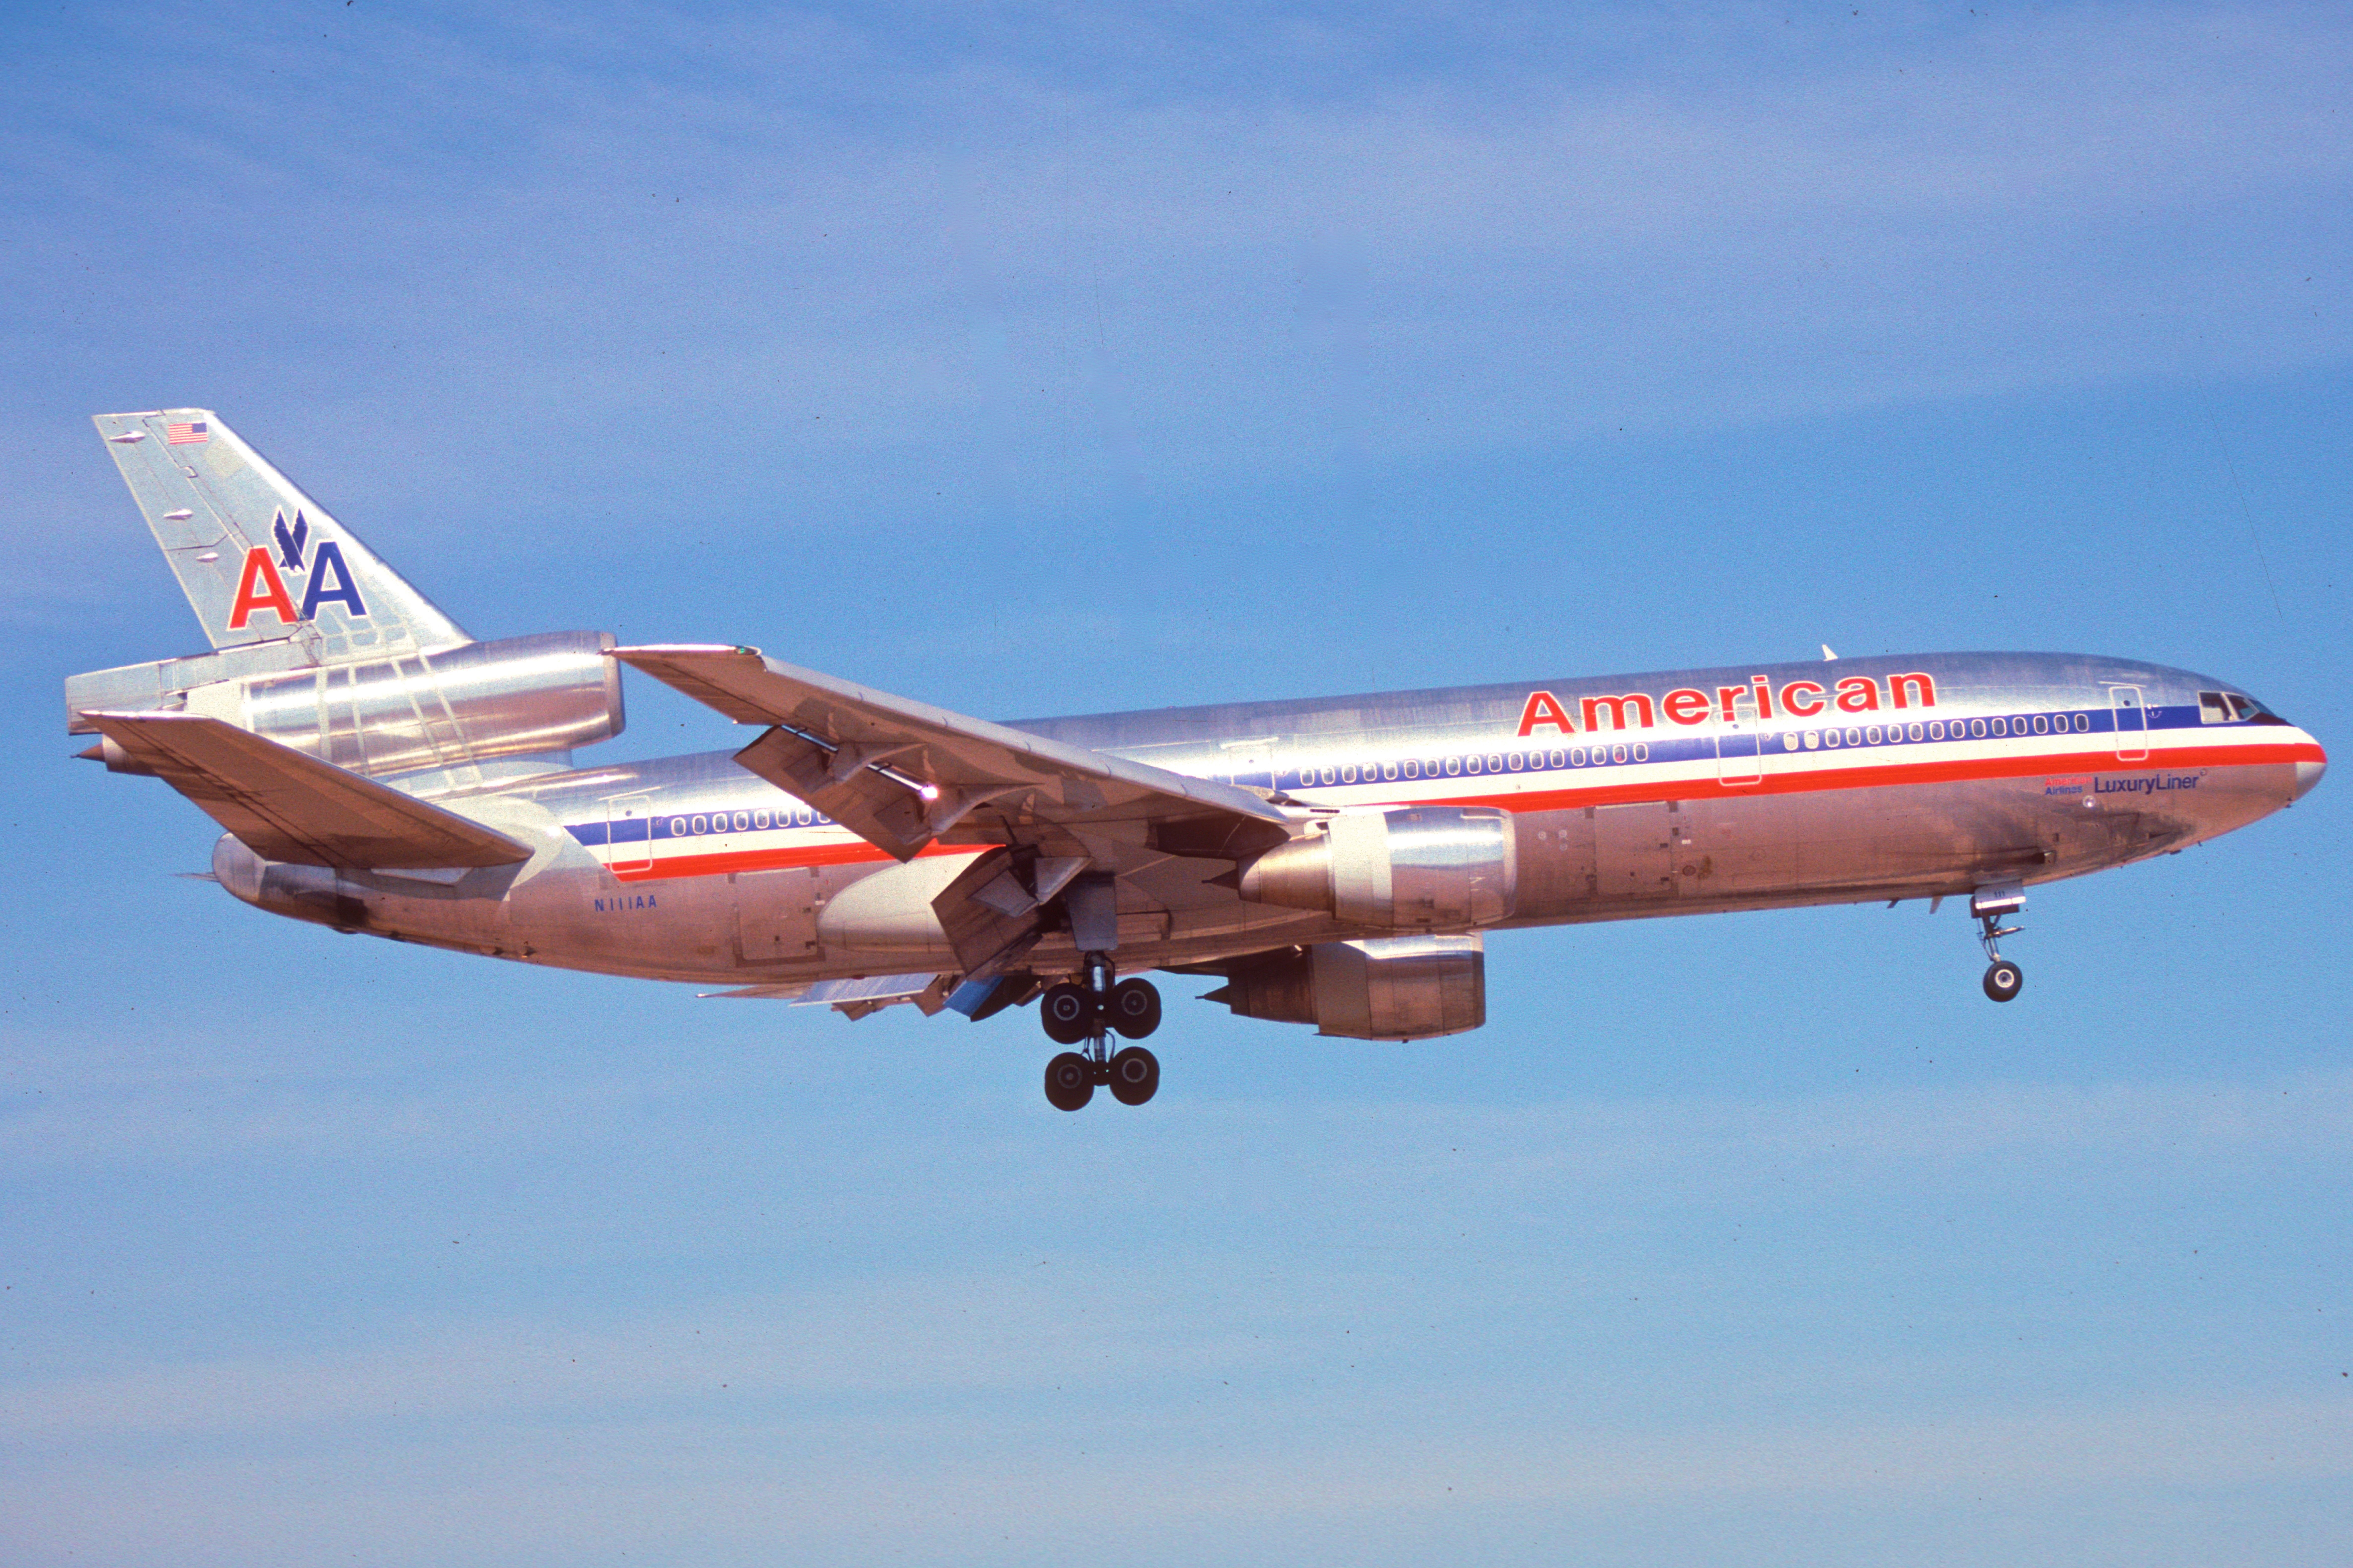 An American Airlines DC-10 flying in the sky.